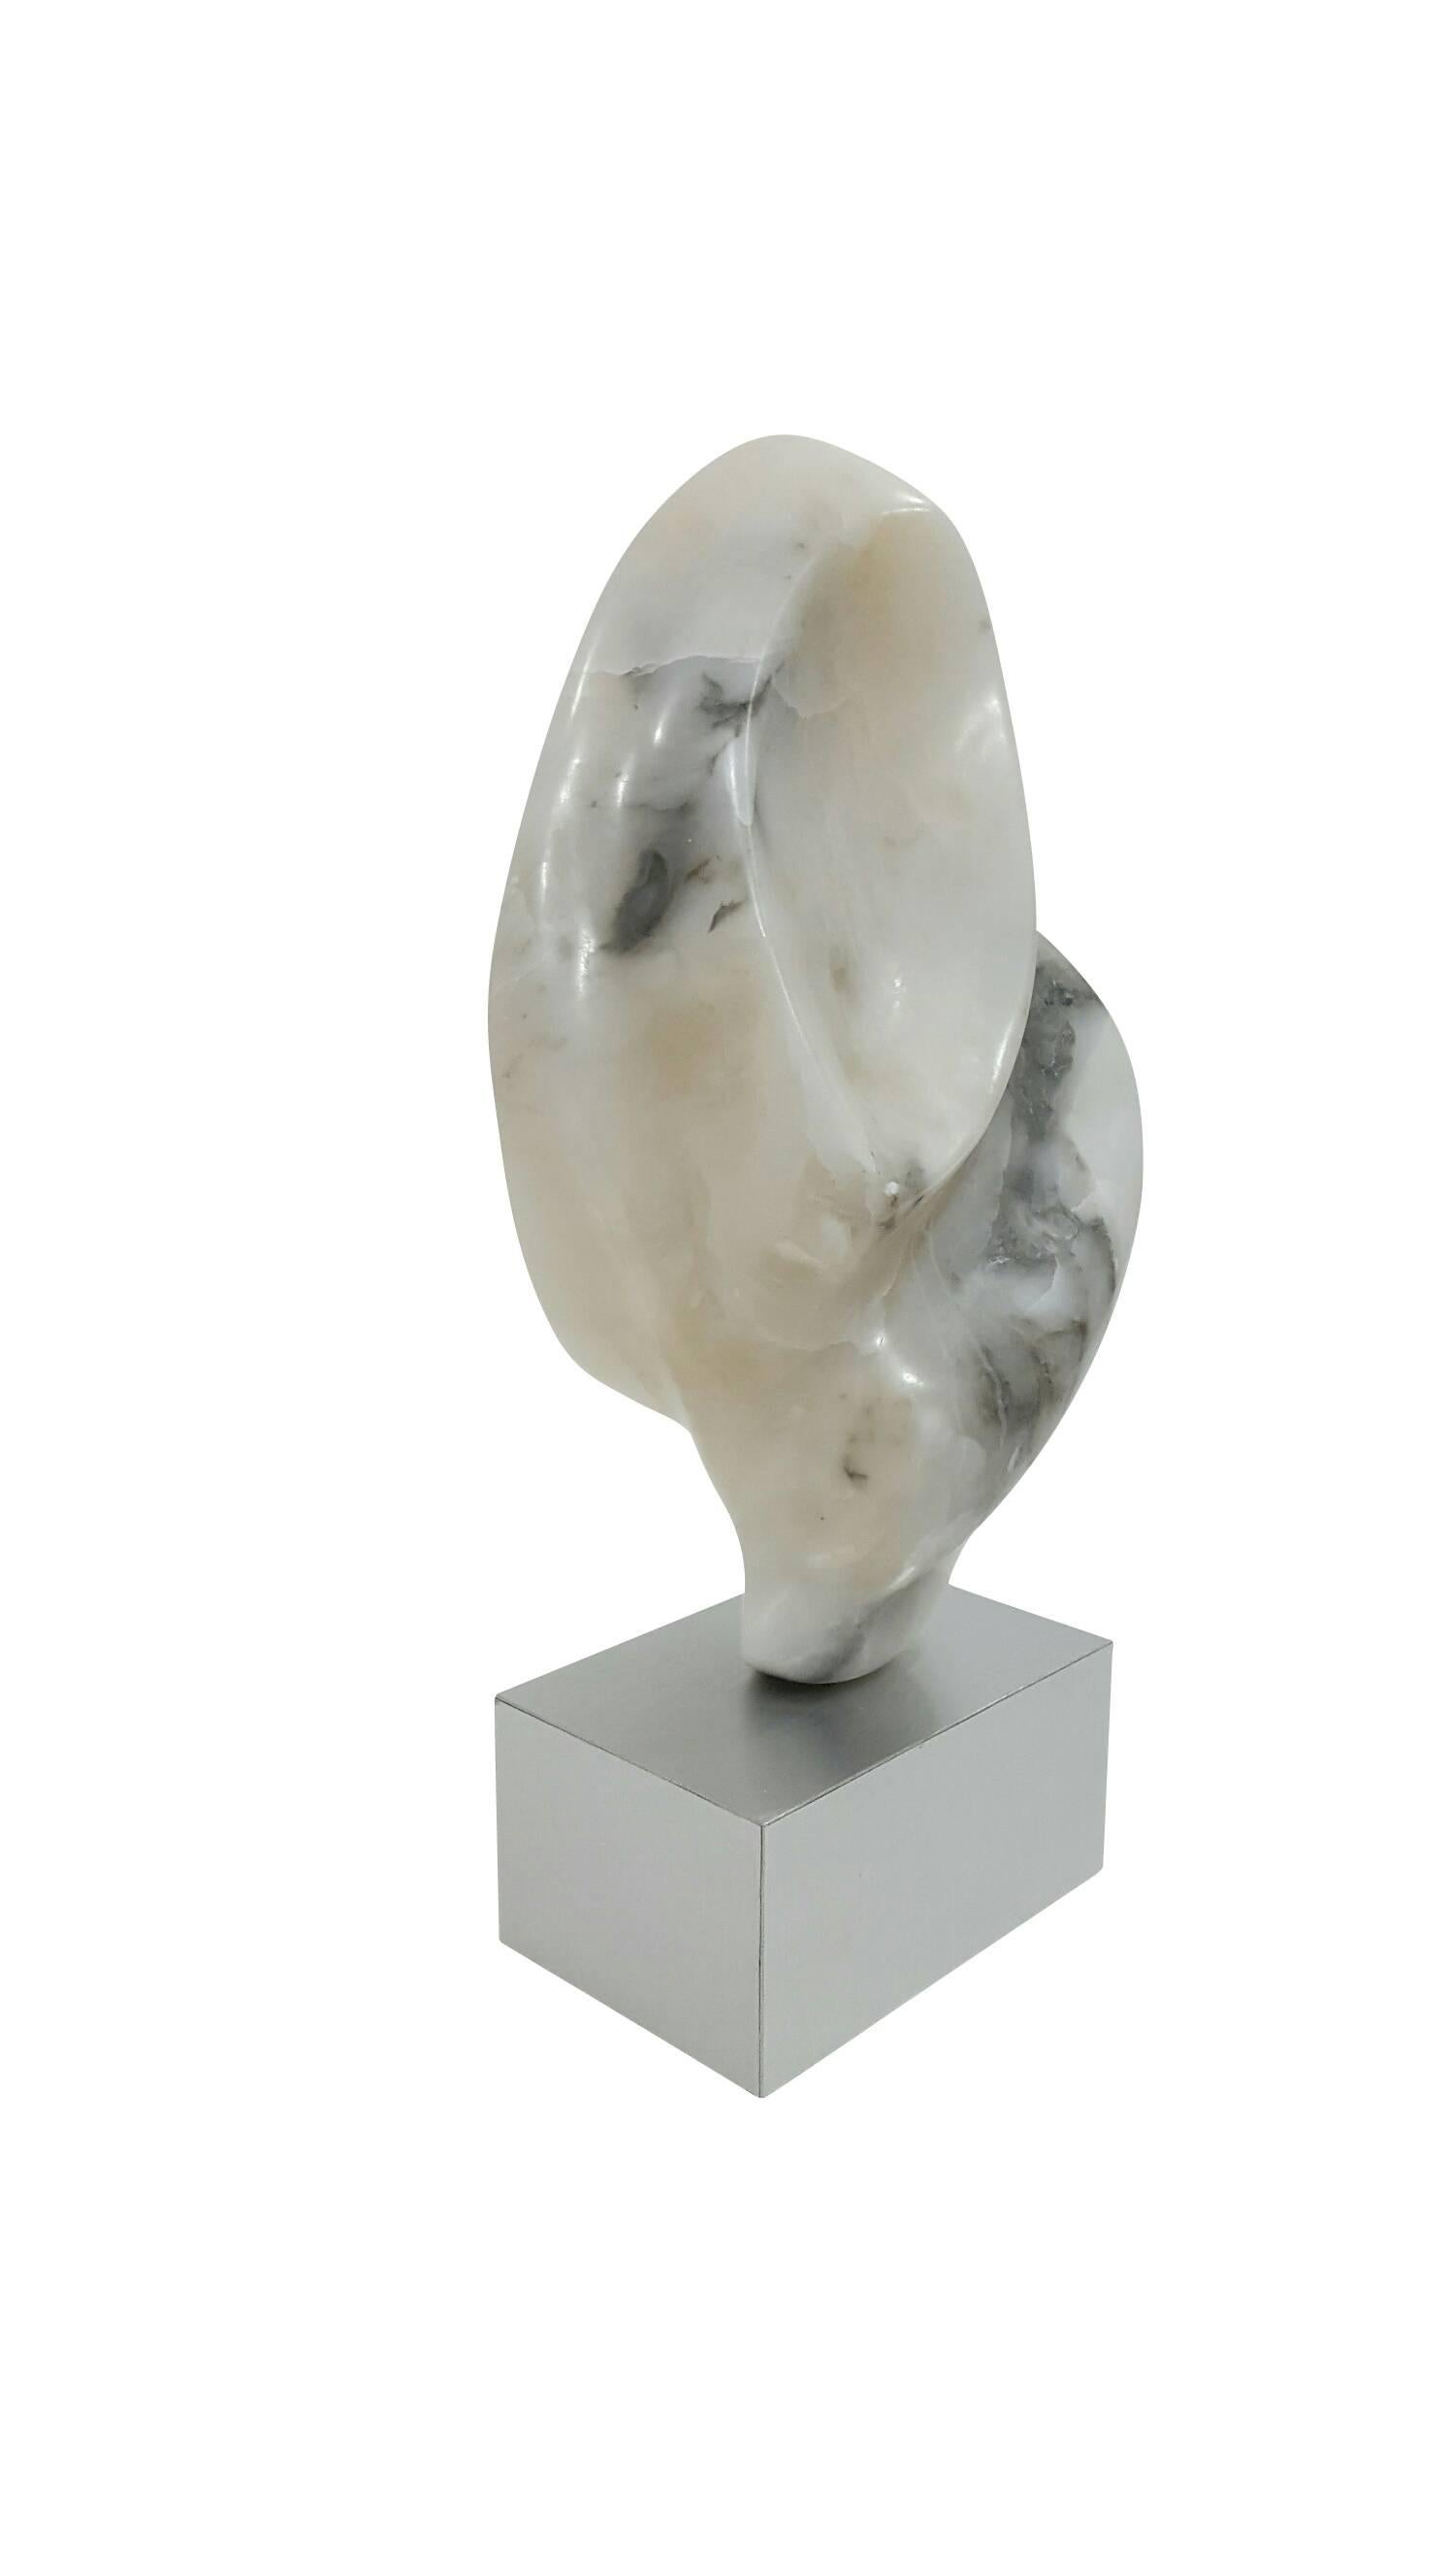 Majestic 19th century abstract white marble sculpture
with aluminum base
by M. Ephraim.
One of the kind.